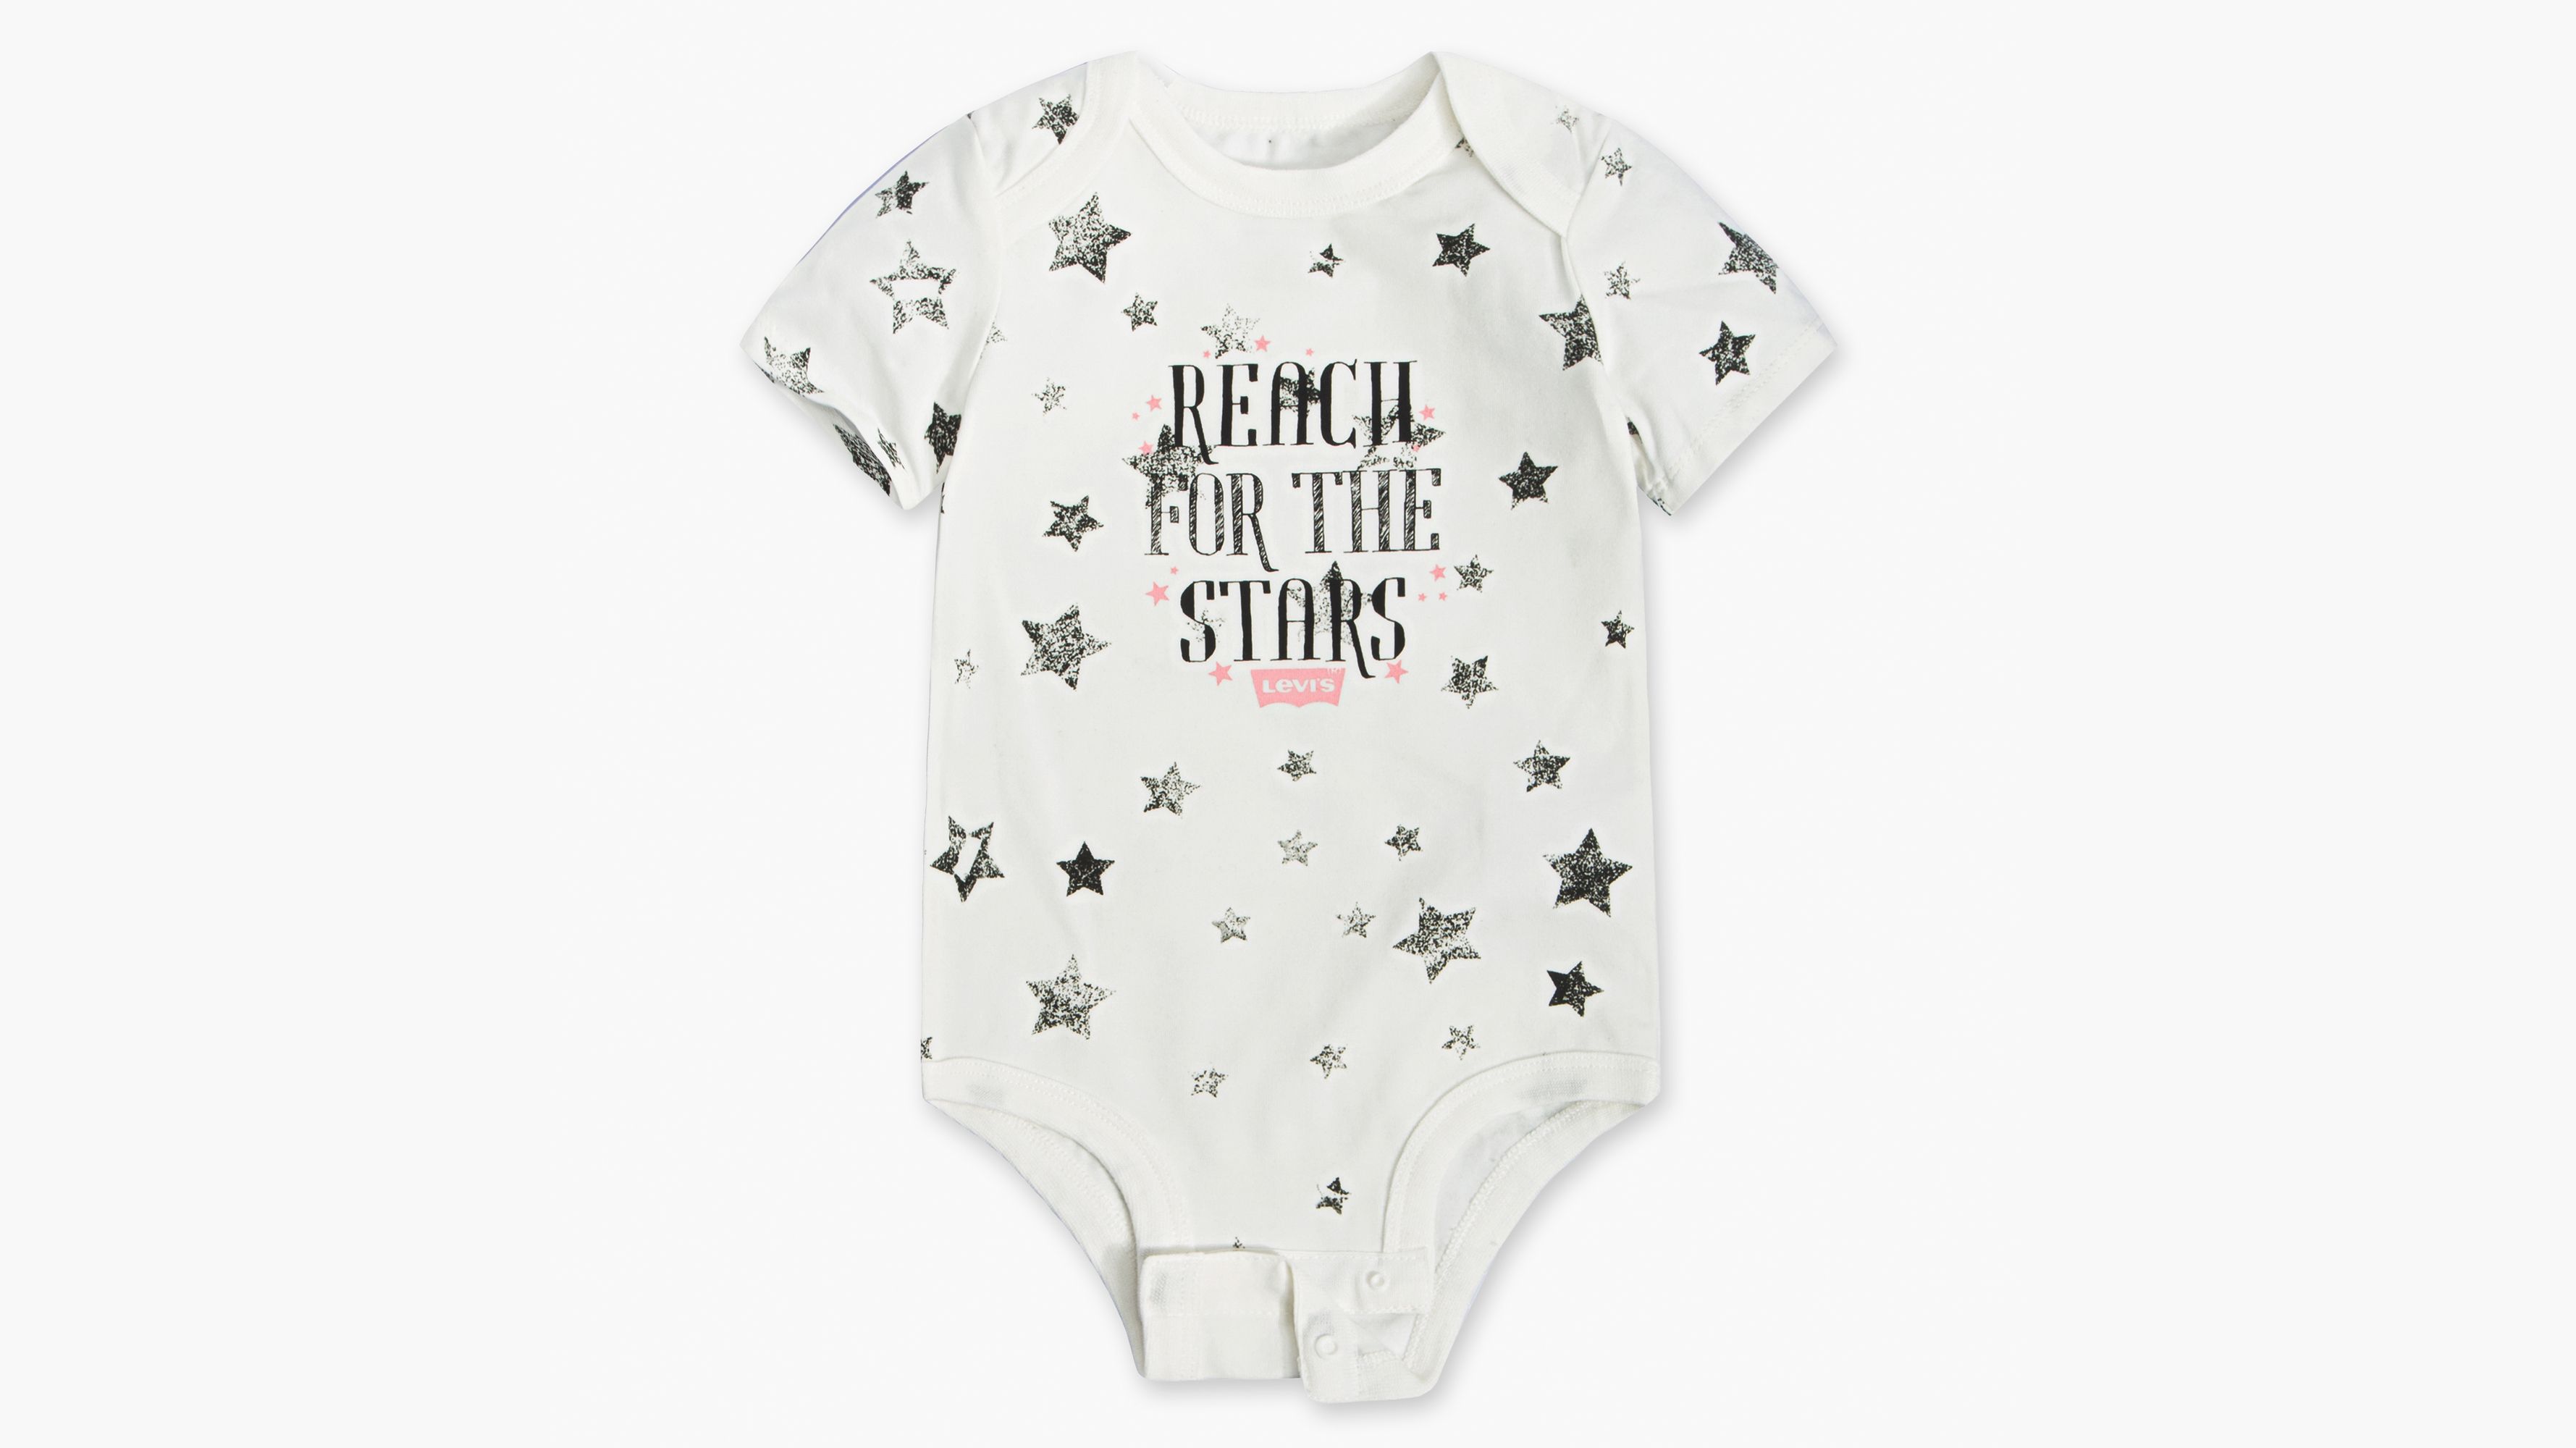 Baby Clothes - Onesies & 2-3 Piece Sets for 6-24 Months | Levi's® US